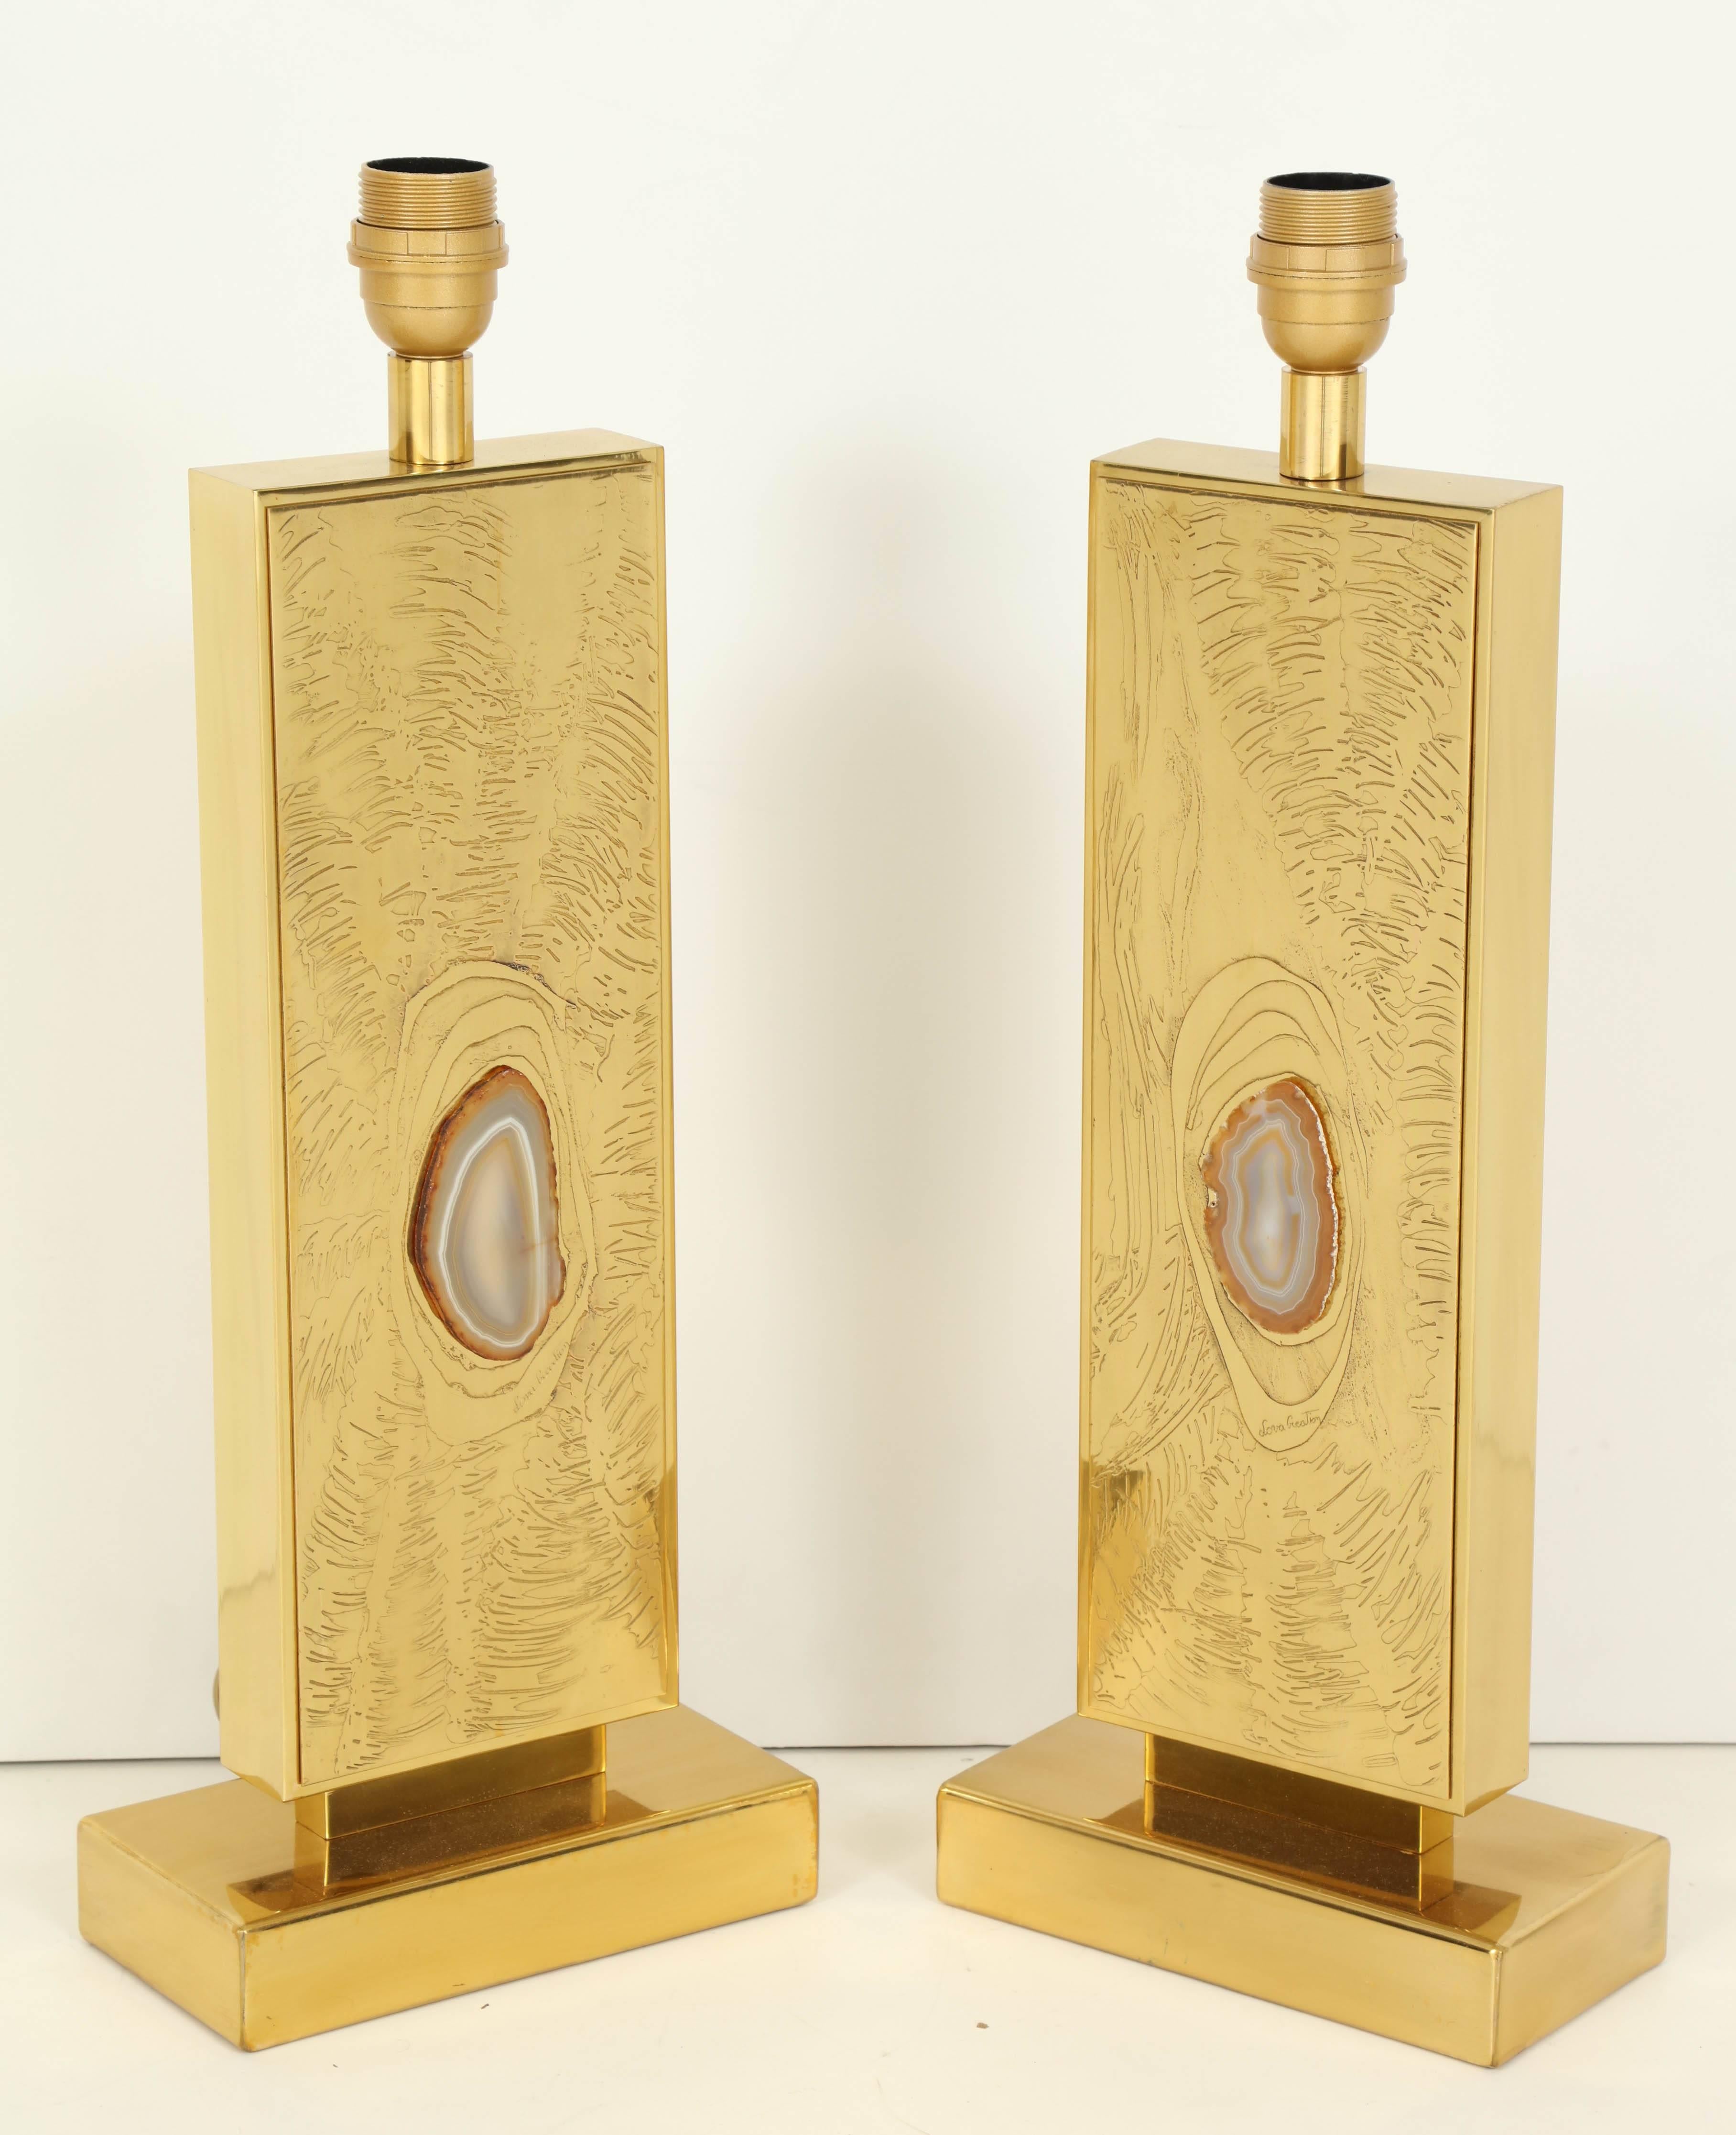 Pair of lamps by Lova Creation etched brass inlay agates, signed by the artist.
New rewired in perfect conditions.